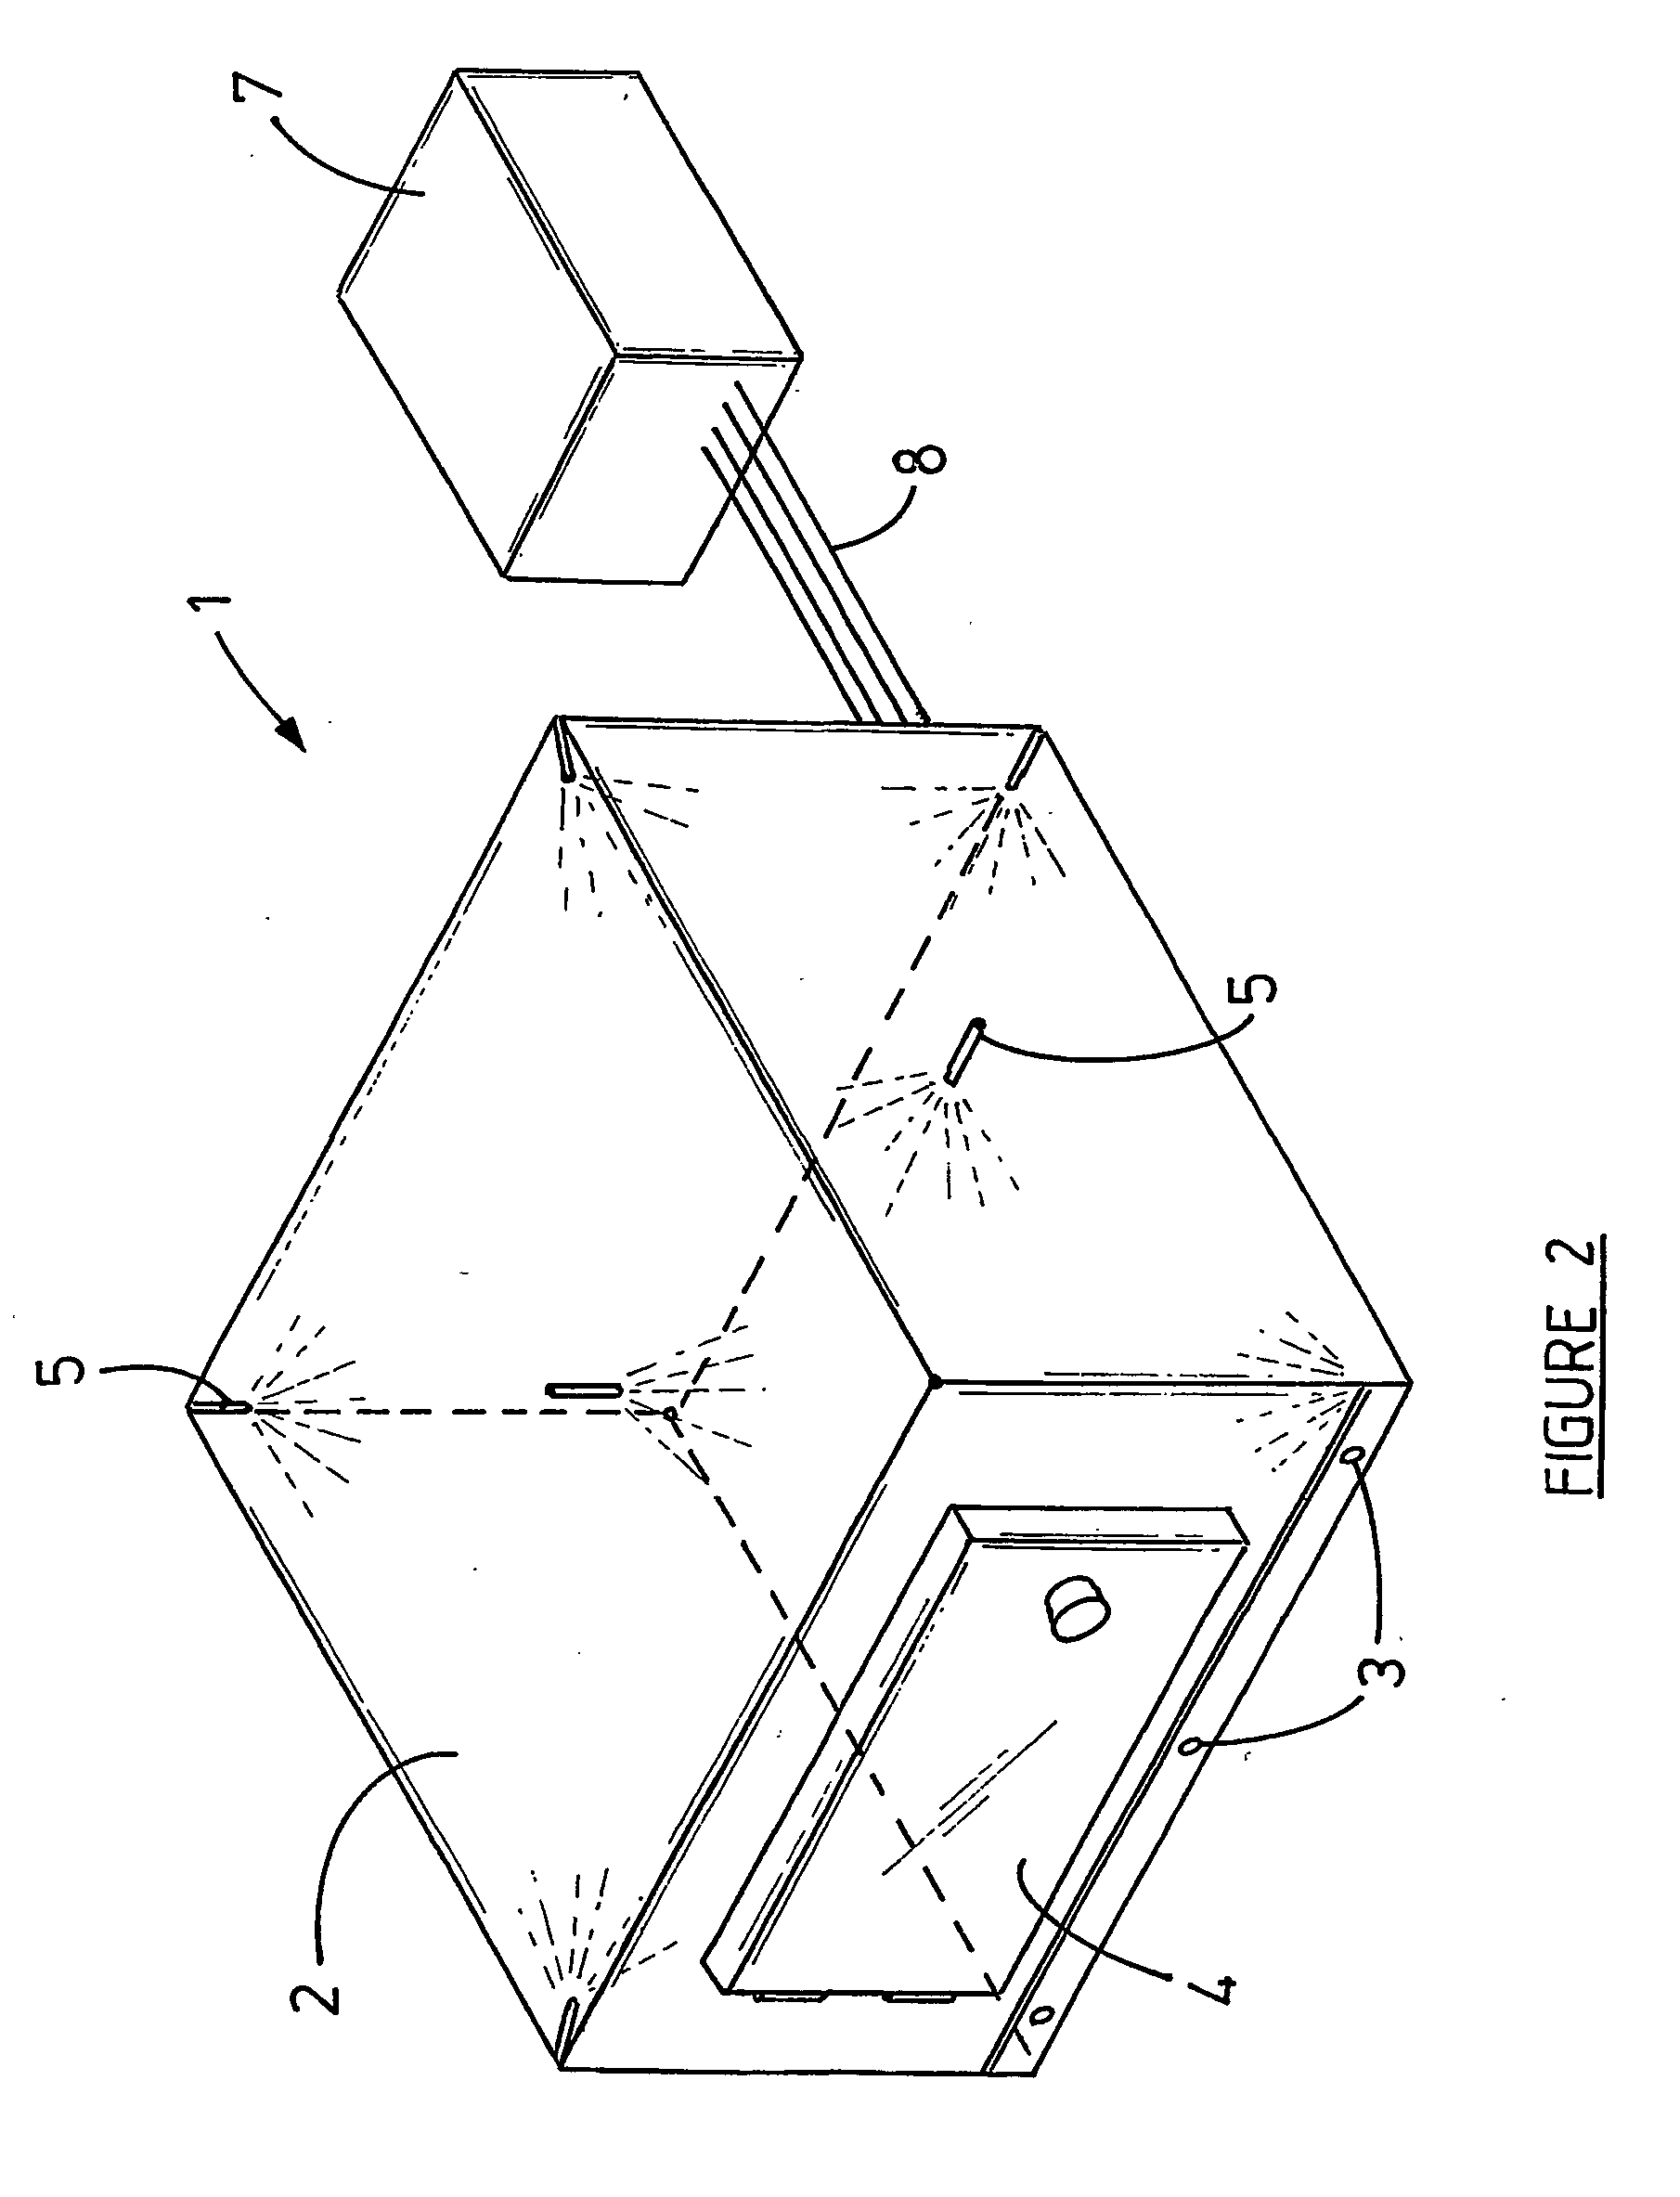 Method of and equipment for washing, disinfecting and/or sterilizing health care devices